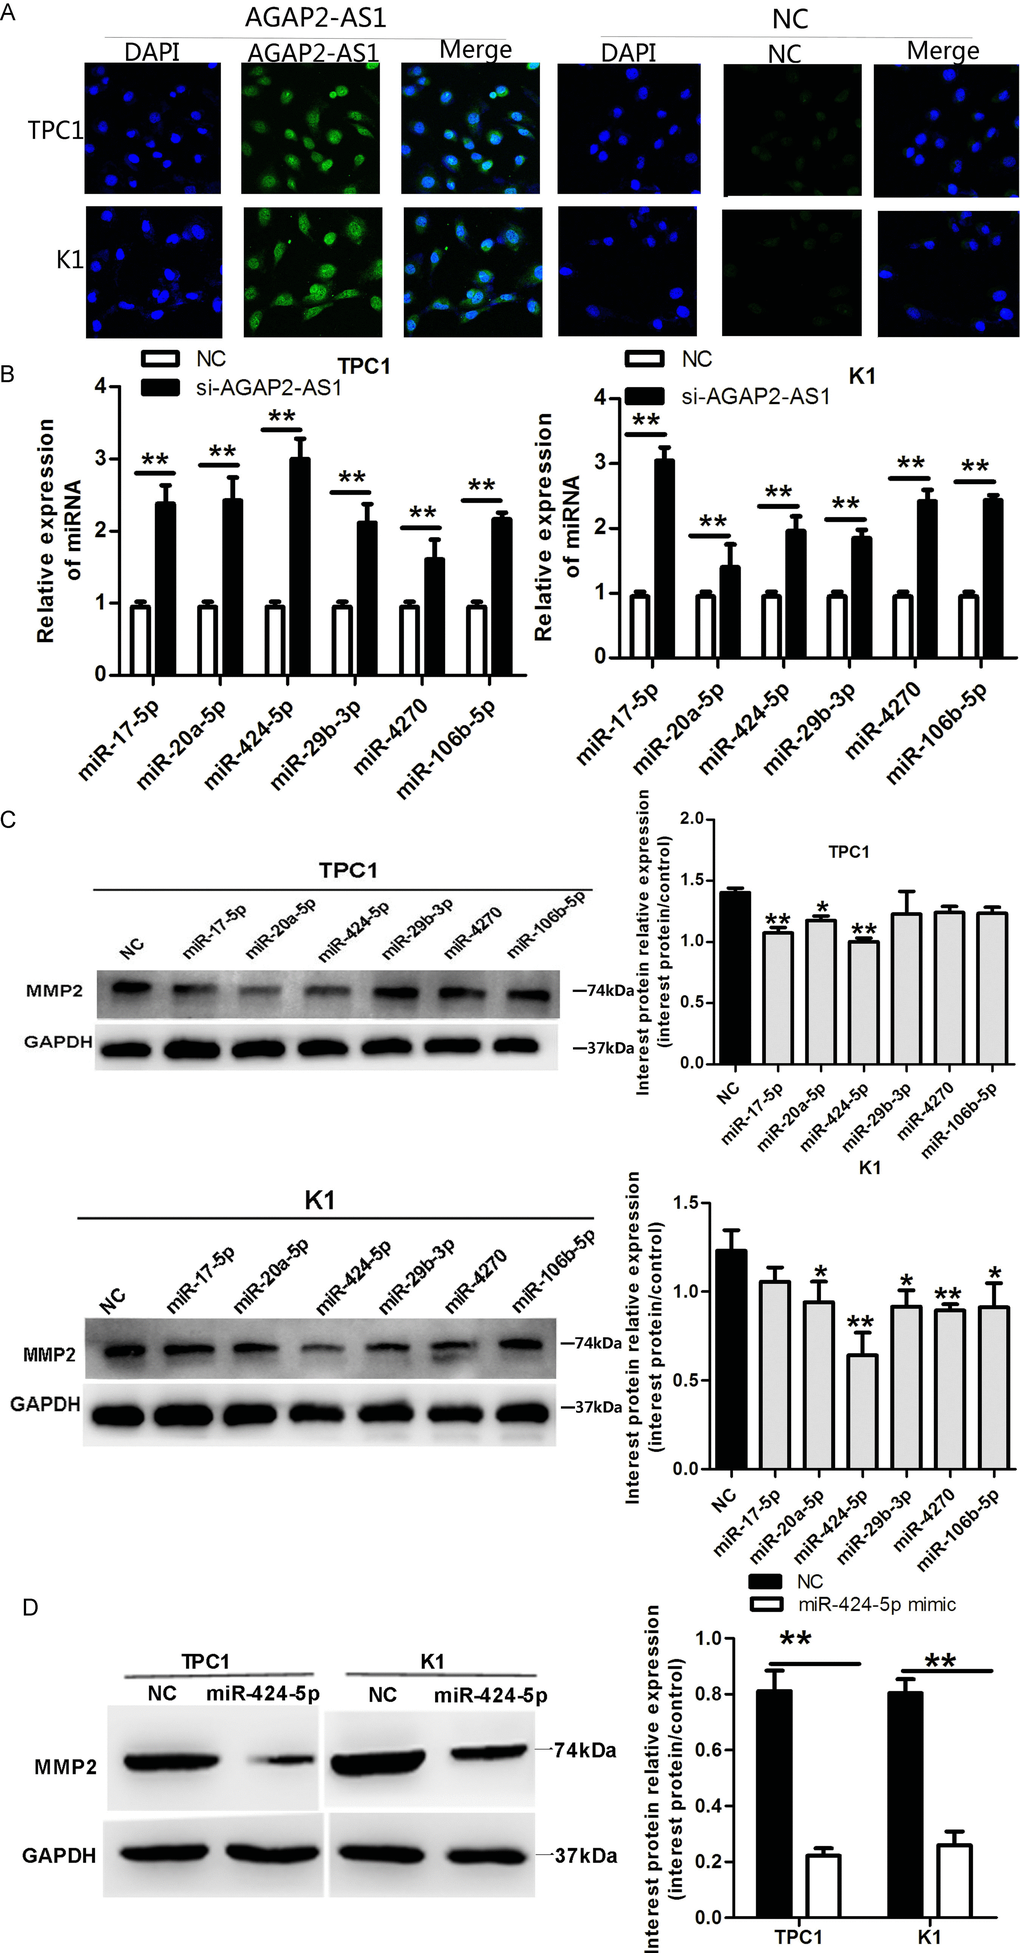 AGAP2-AS1 suppression decreases MMP2 expression by upregulating miRNA-424-5p in PTC cells. (A) FISH analysis demonstrating cytoplasmic localization of AGAP2-AS1 in TPC1 and K1 cells. (B) qRT-PCR of miRNAs in TPC1 and K1 cells after AGAP2-AS1 knockdown. Data are presented as the mean ± S.D, analyzed using an independent samples t-test; **P vs. NC. (C, D) Western blotting of MMP2 in TPC1 and K1 cells incubated with miR-424-5p mimic. Data are presented as the mean ± S.D, analyzed using an independent samples t-test; *P vs. NC.